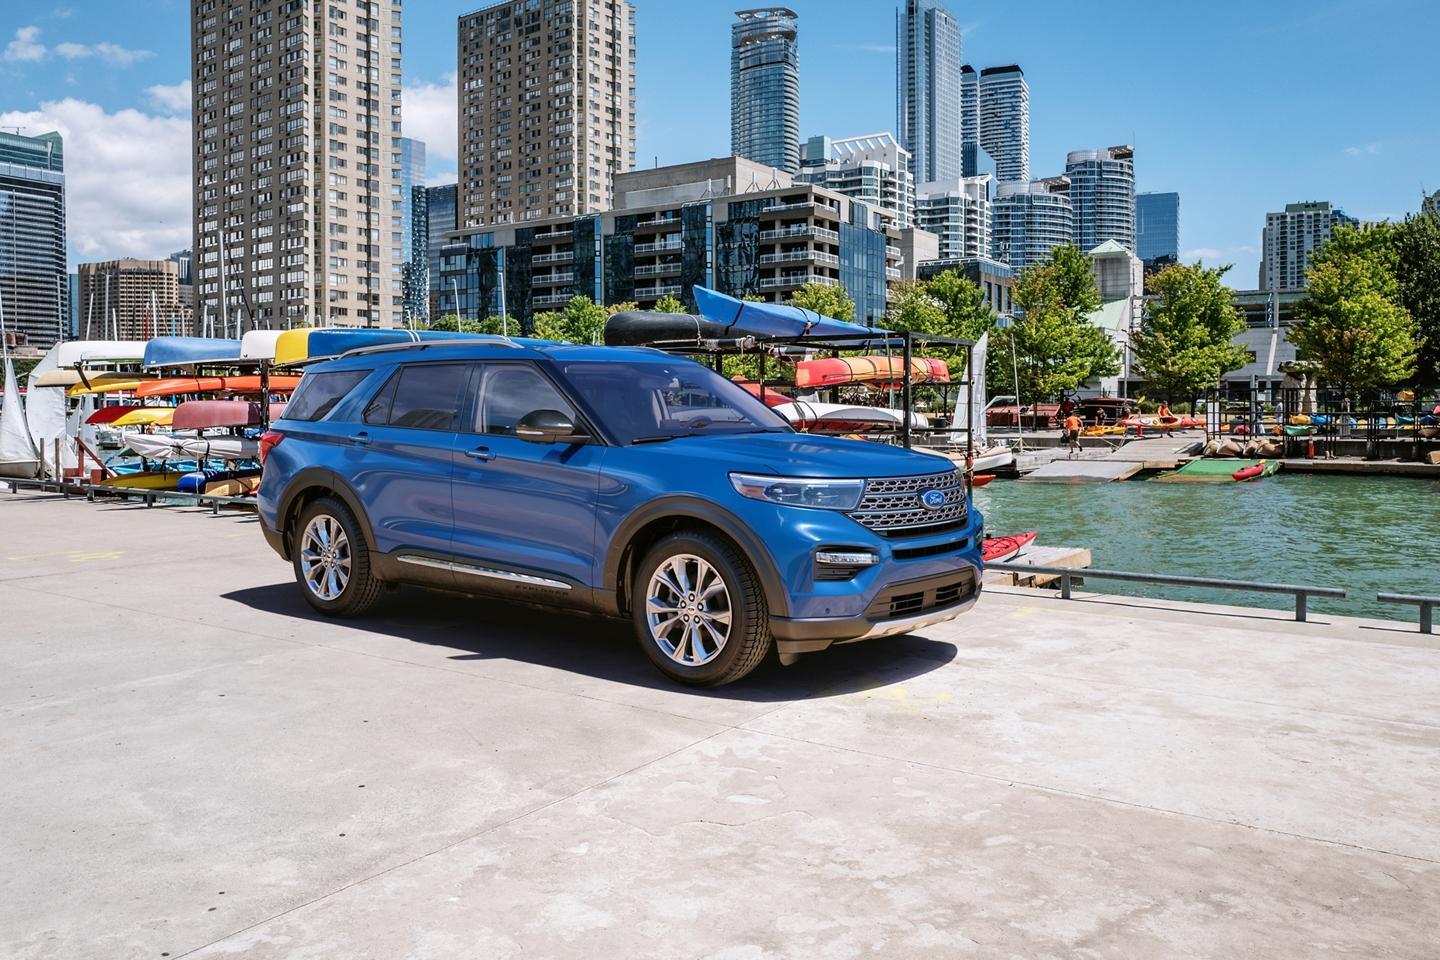  Ford All New 2020 Explorer image